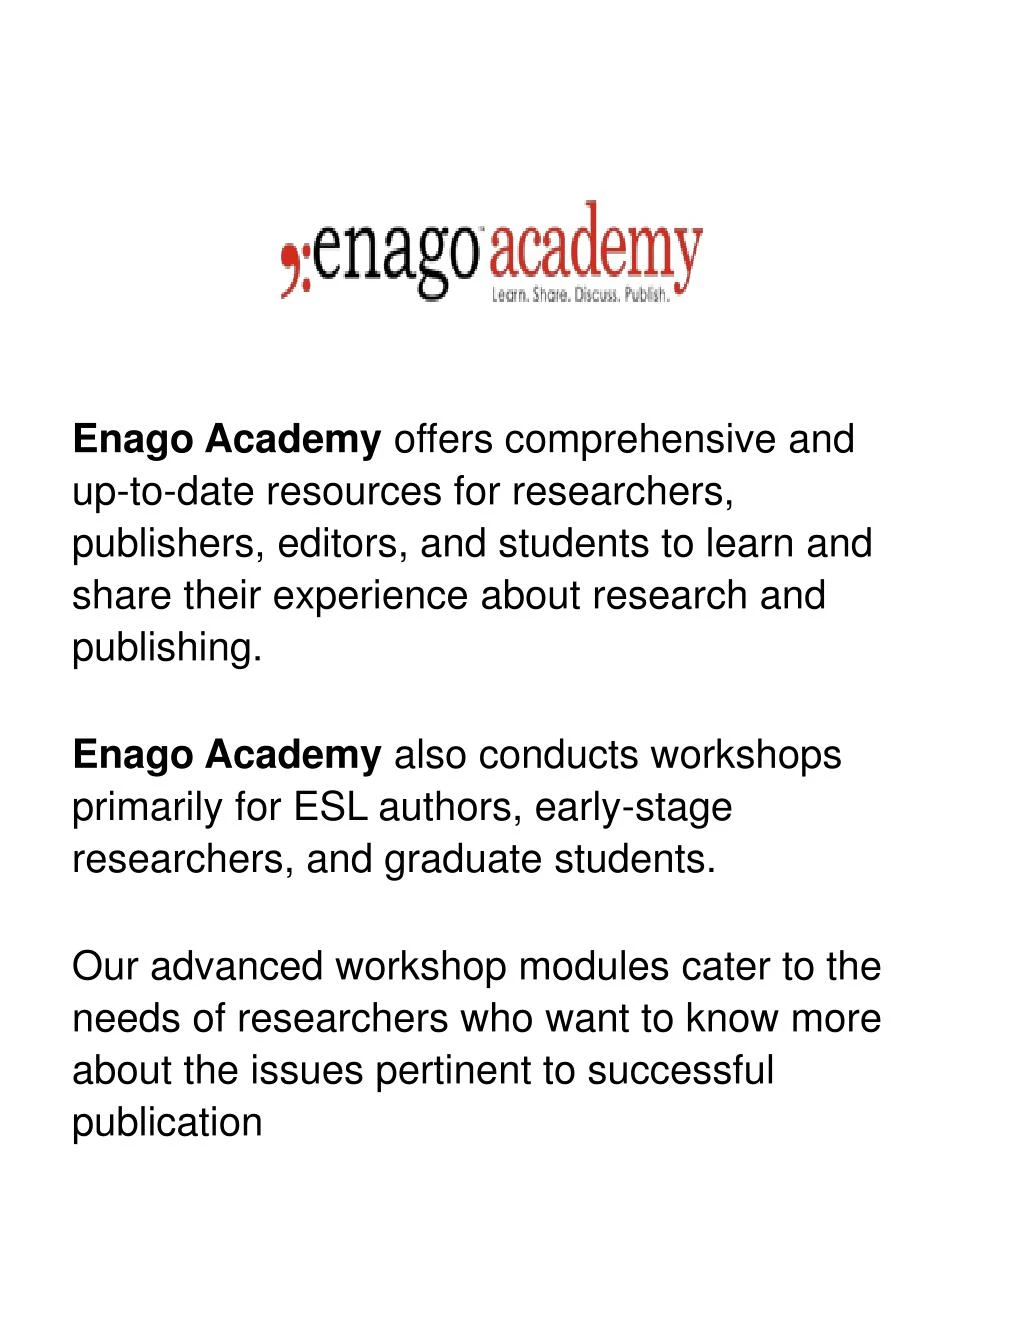 enago academy offers comprehensive and up to date n.